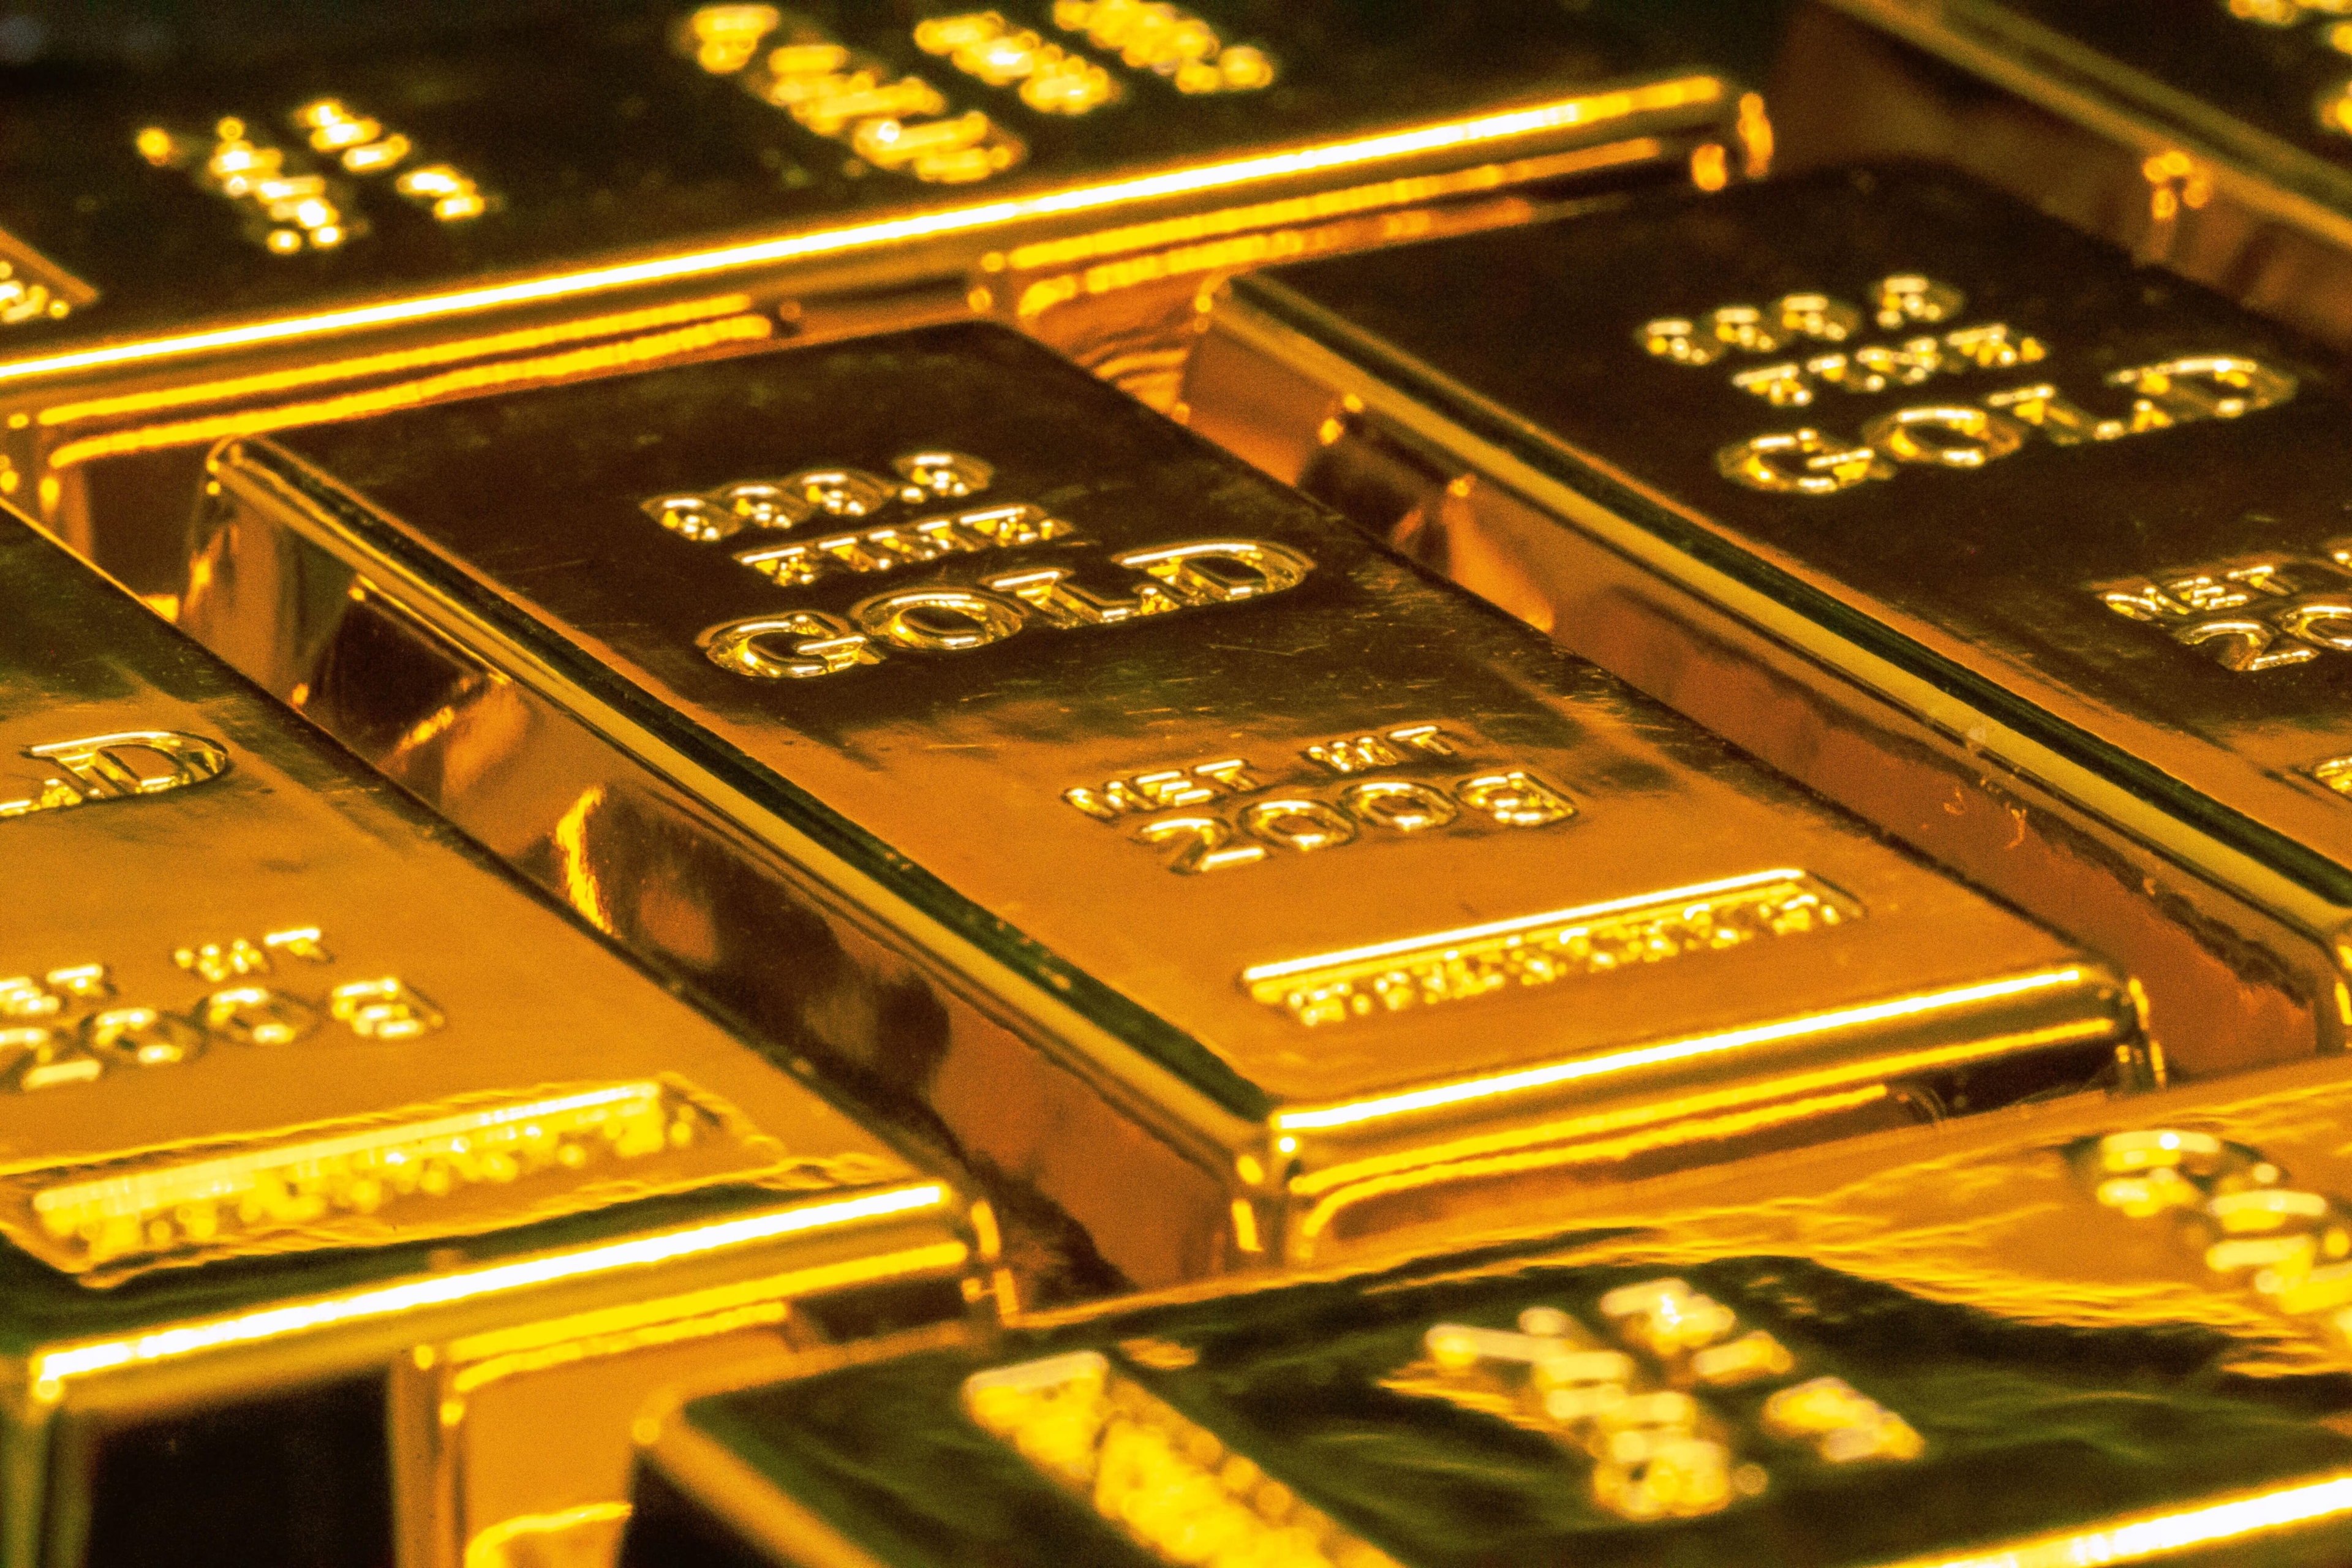 Gold and silver prices fell on Monday amid sharp decline in crude oil prices, rising US bond yields and a firmer dollar. Gold April futures contract settled at $1939.80 per troy ounce with a loss of 0.92 percent and silver May futures contract were settled at $25.20 per troy ounce with a loss of 2.06 percent.